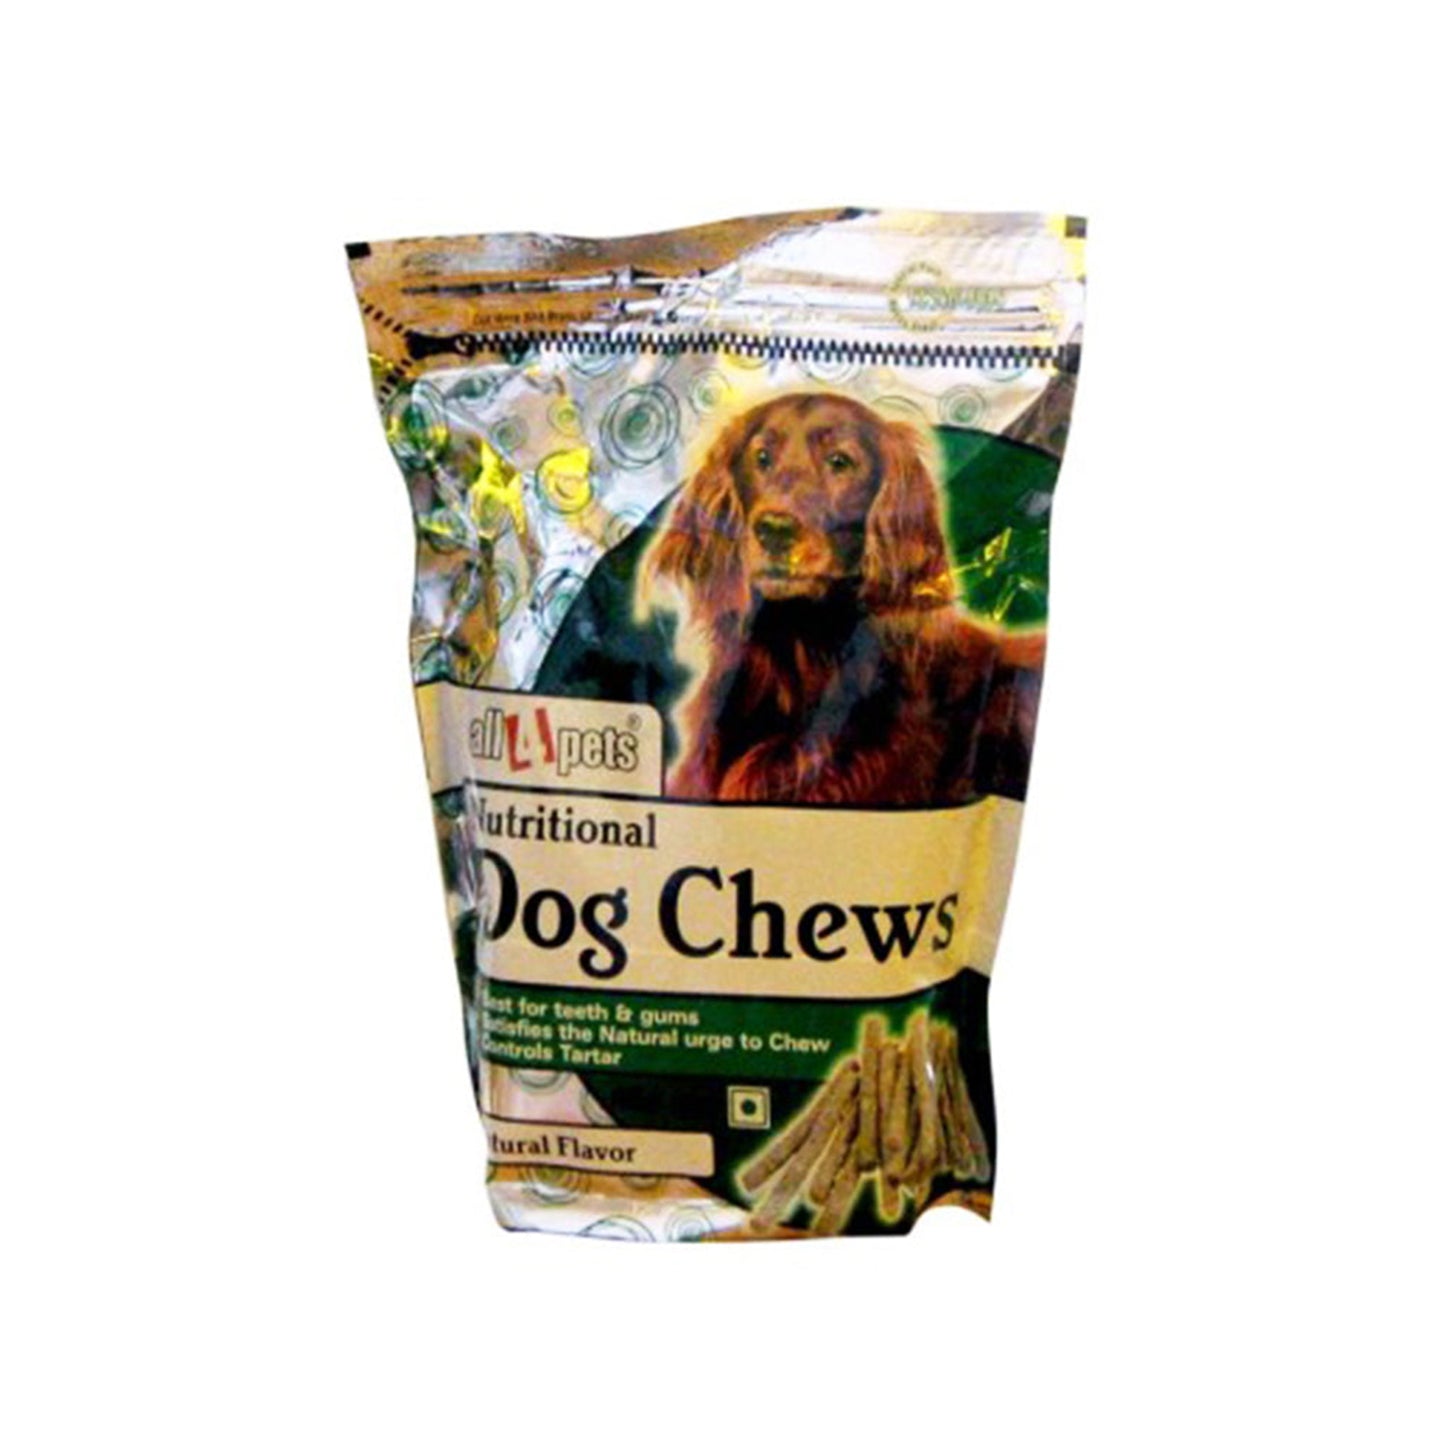 All4pets - Munchy Stick Natural Flavour For Dogs